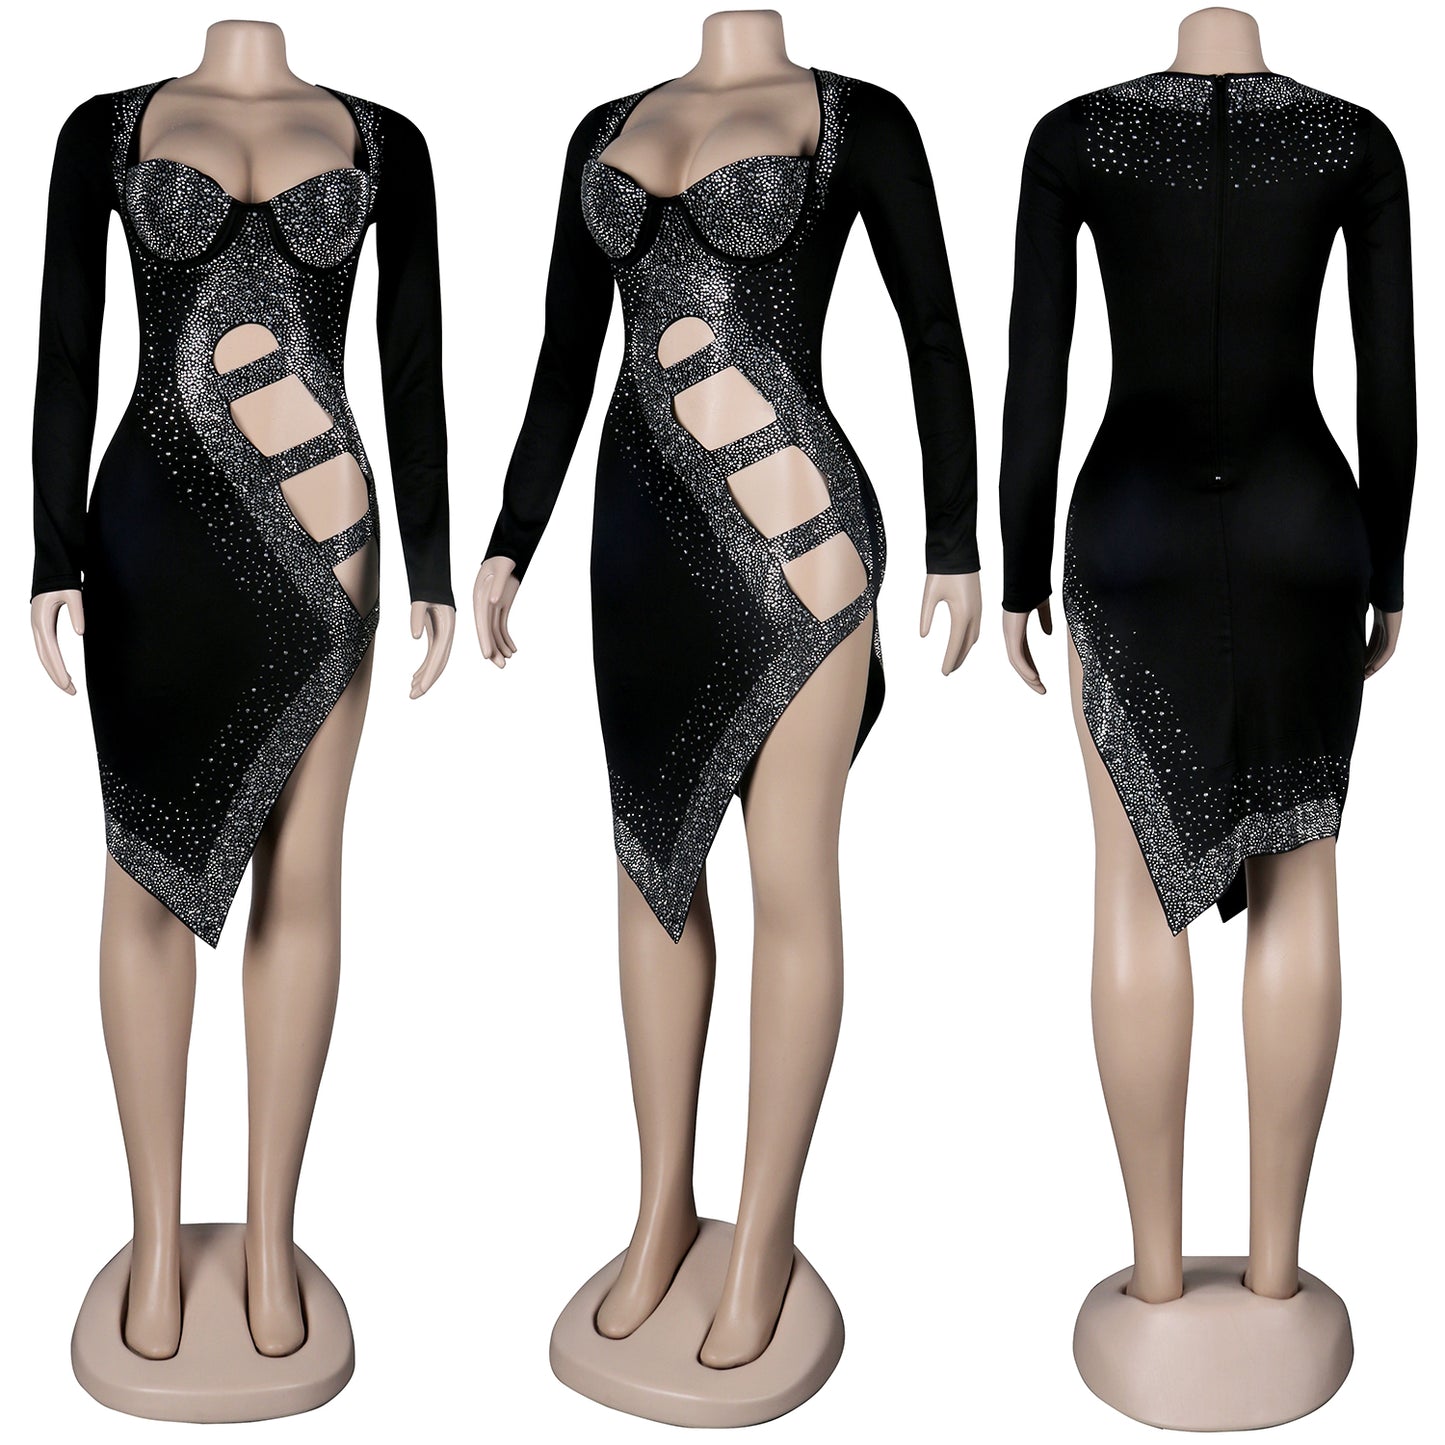 Diamond Studded Long Sleeved Dress Nightclub Clothes Sexy And Beautiful Reflecting The Figure Evening Dress